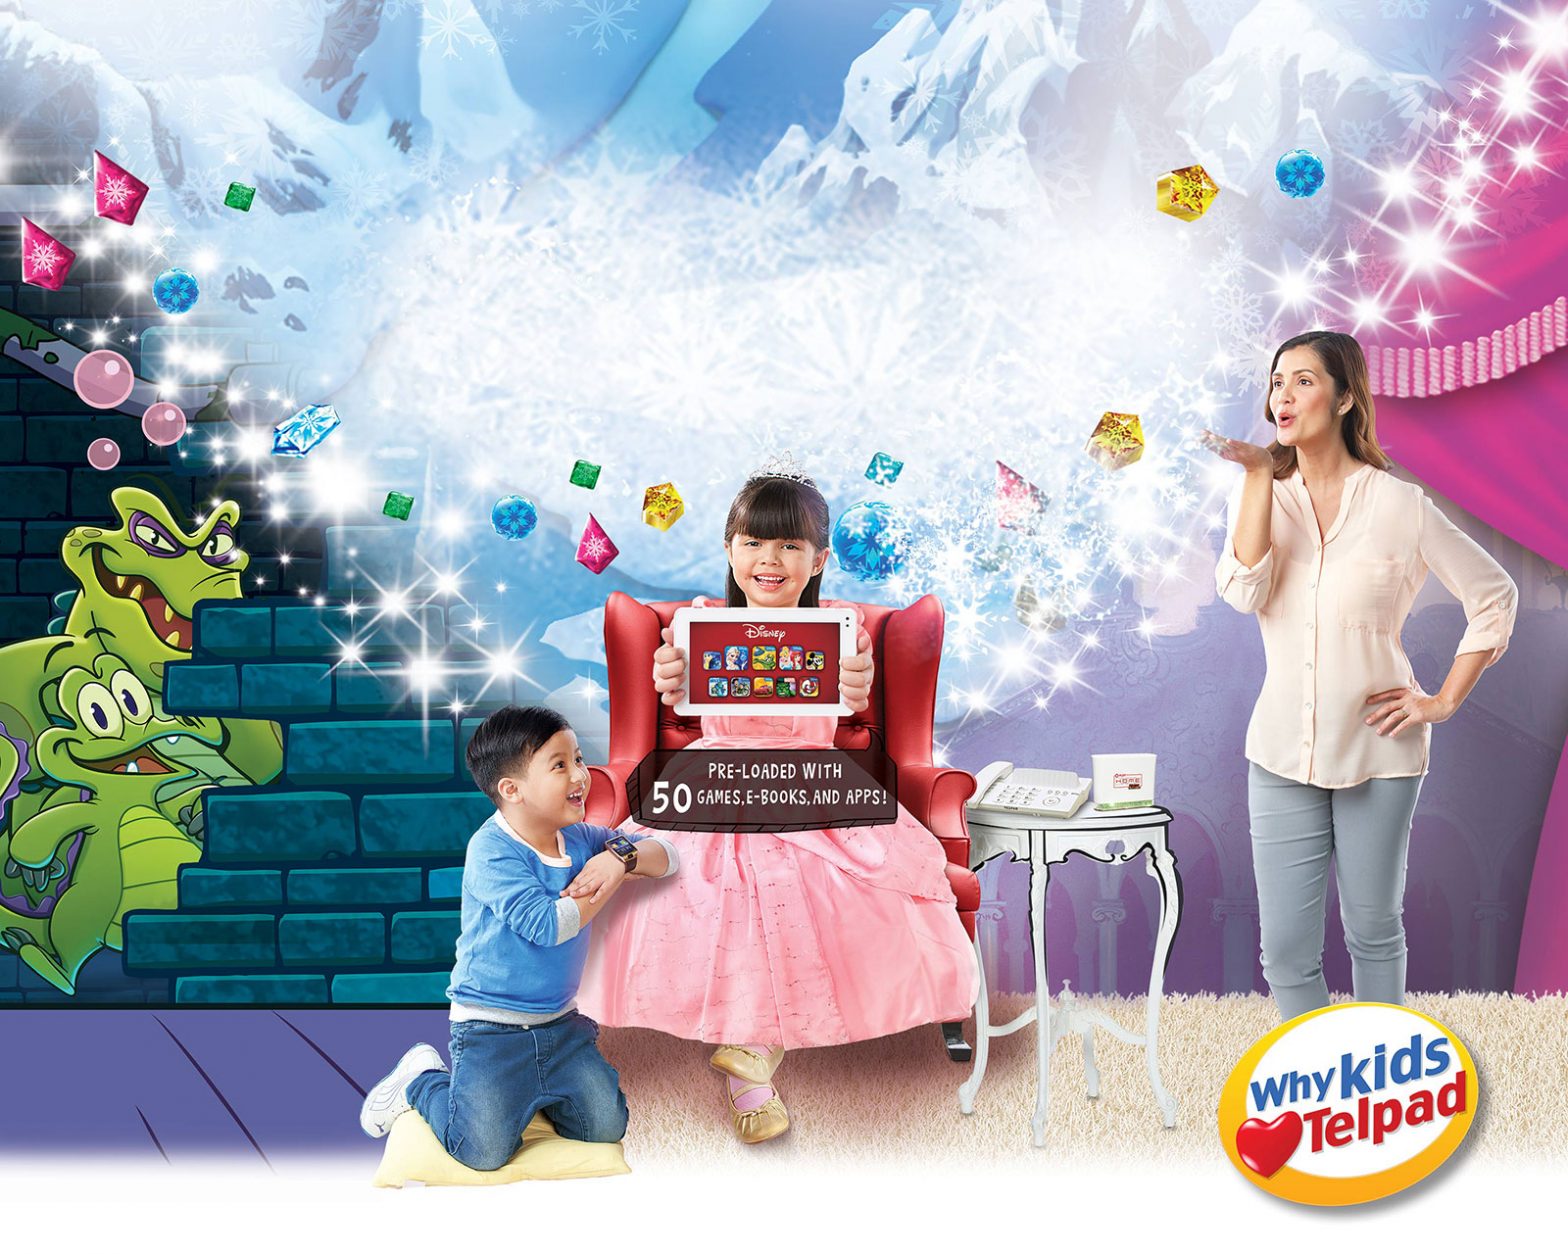 PLDT HOME Telpad boosts content offerings with Disney games, e-books, apps